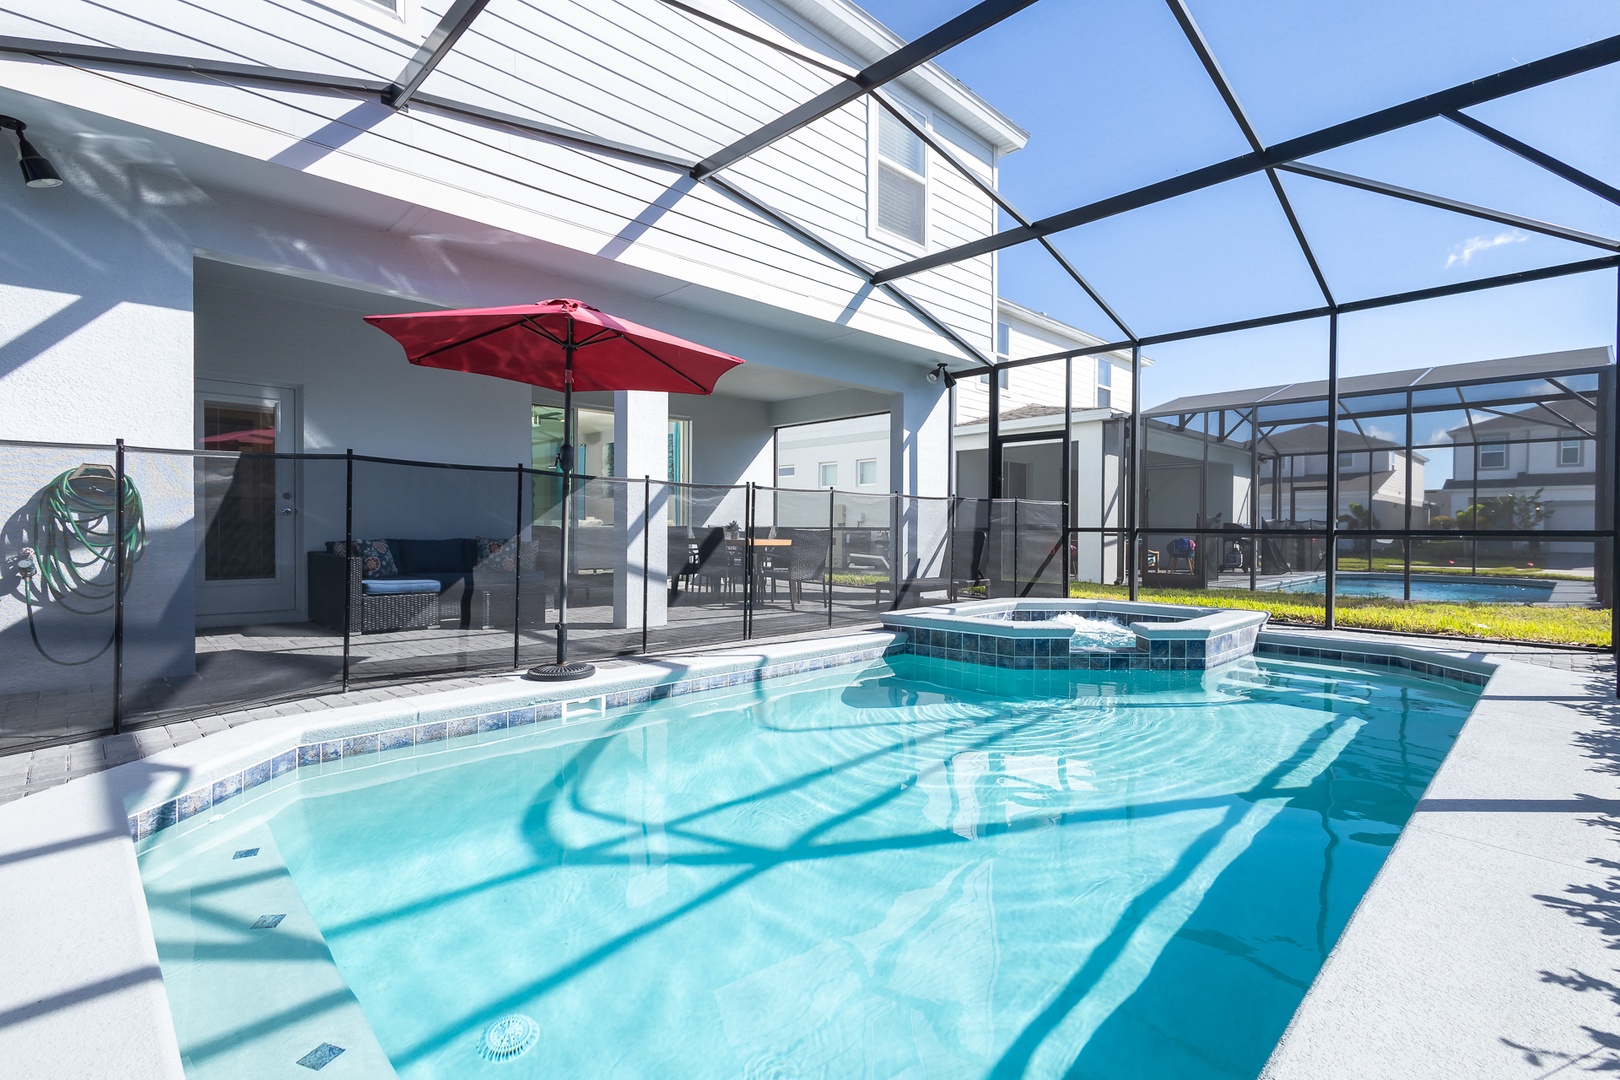 Soak your cares away in the hot tub or make a splash in the sparkling pool!